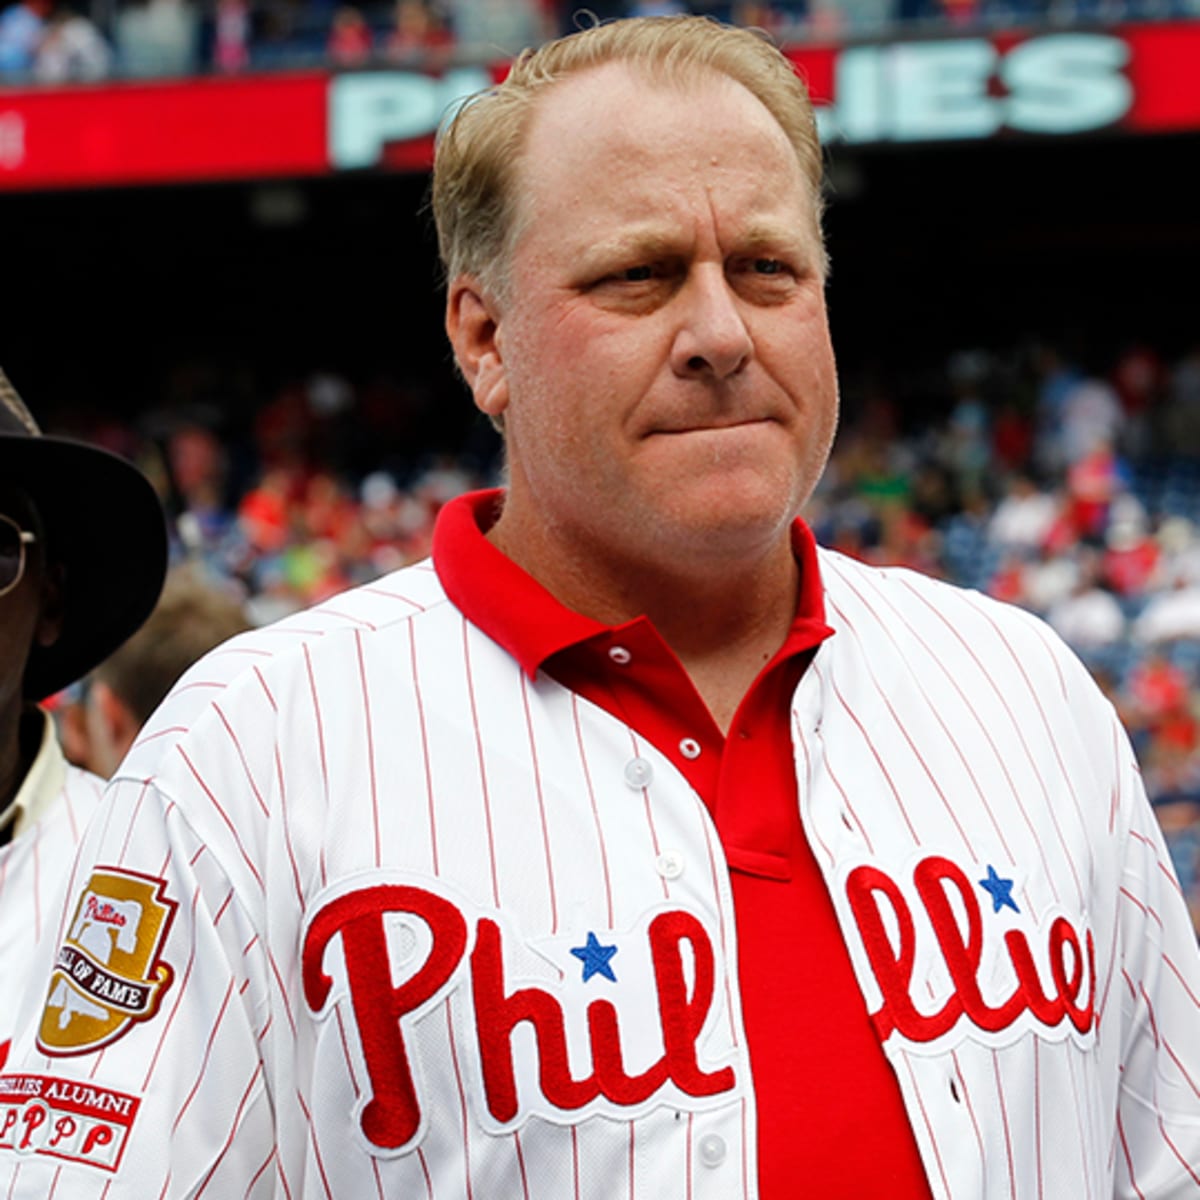 Sports Report: Former Pitcher And Analyst Curt Schillling Sacked By ESPN